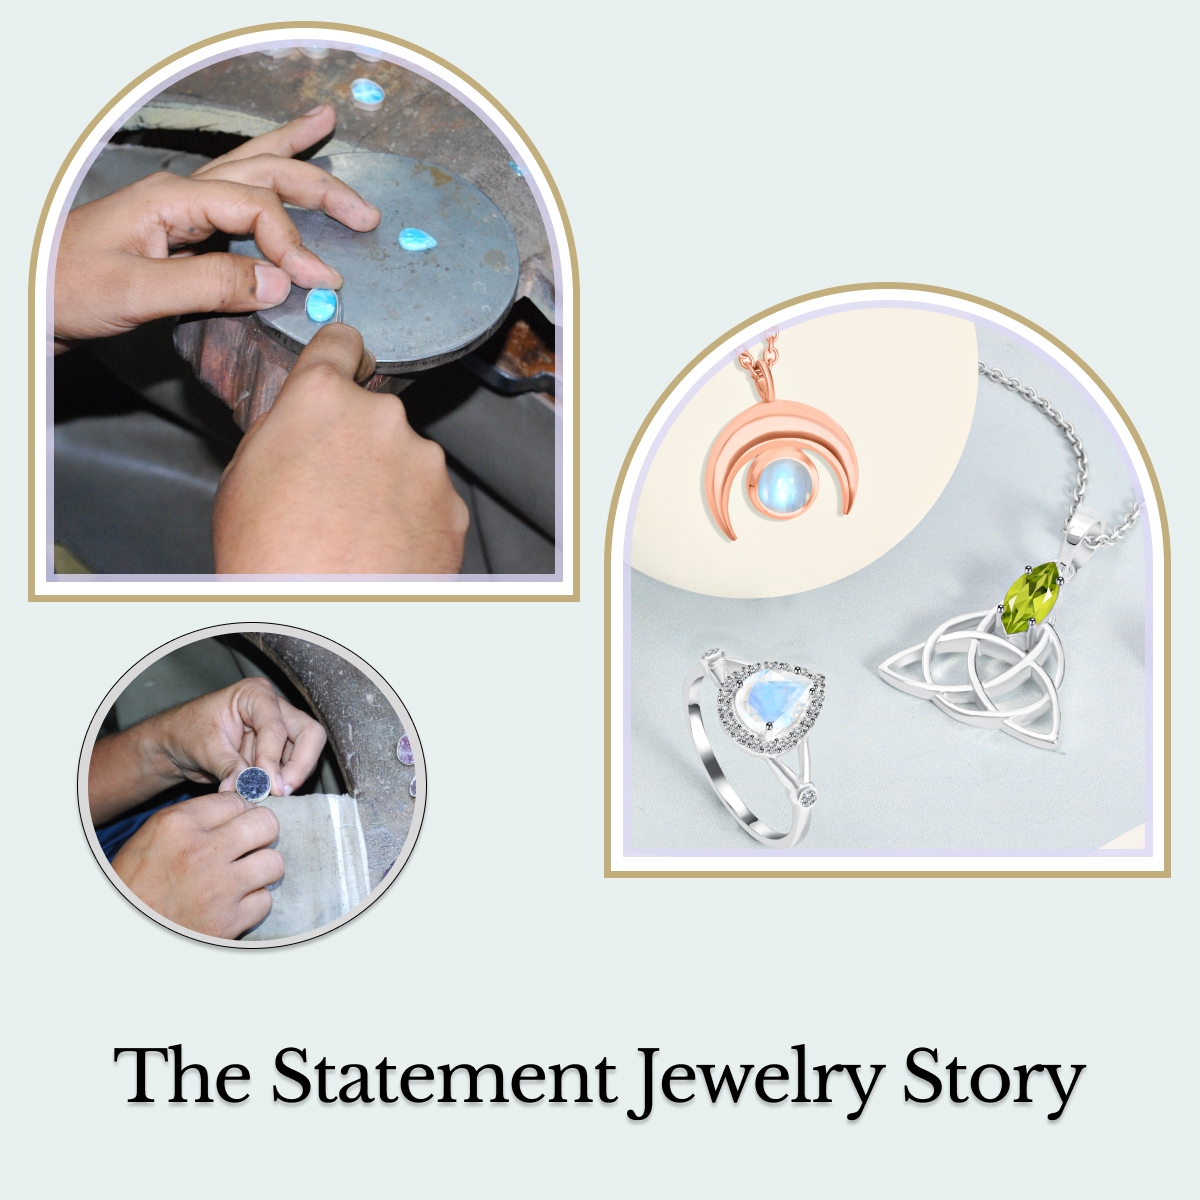 What Does Statement Jewelry Mean?